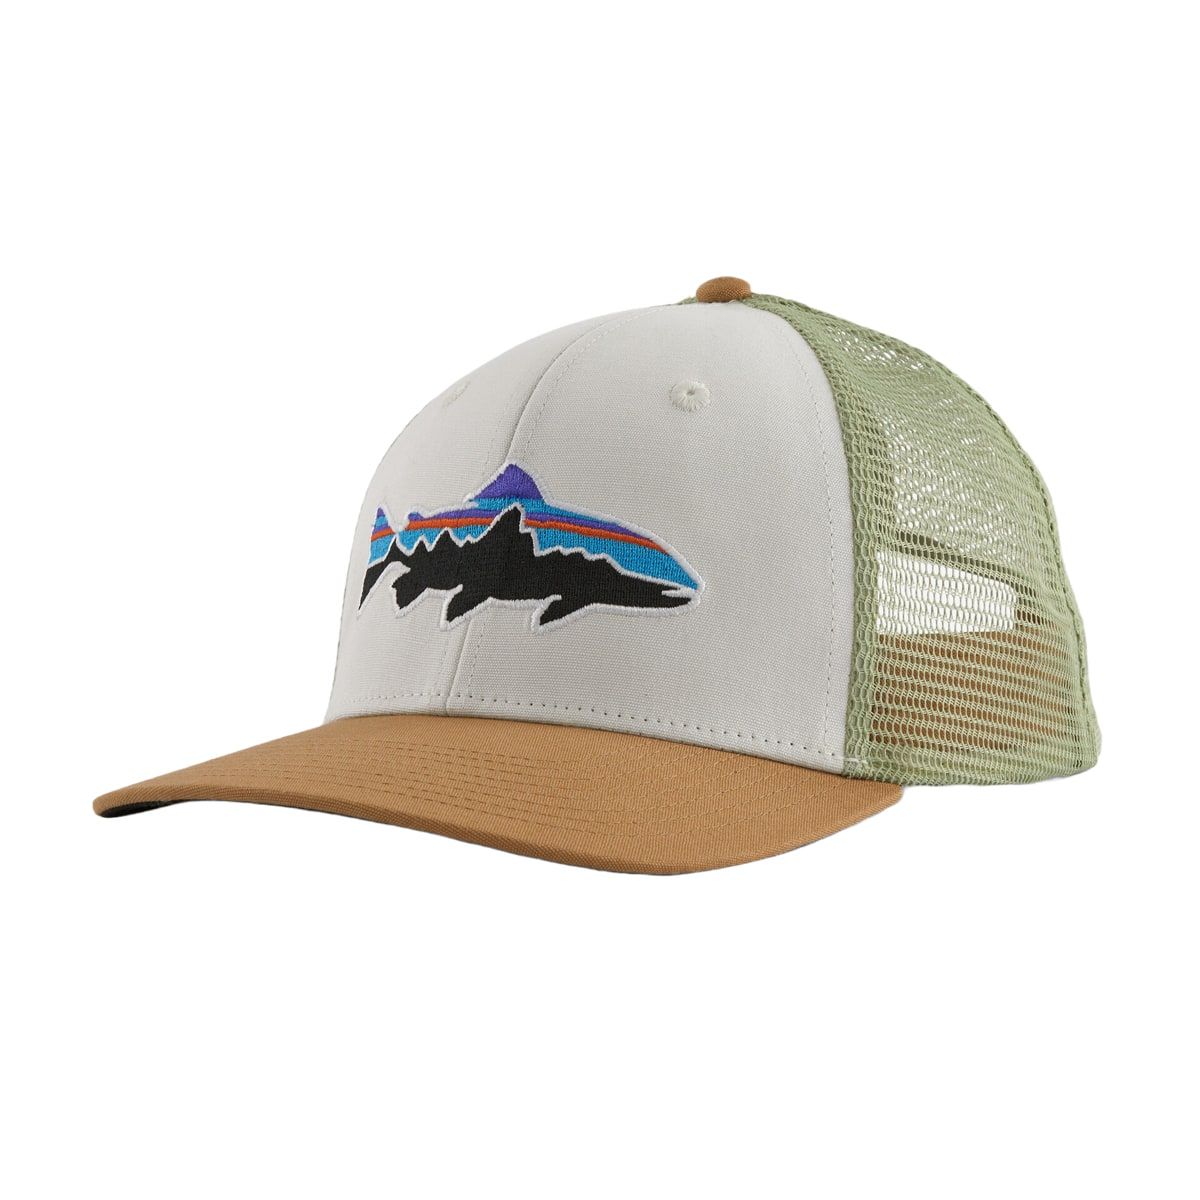 Patagonia Fitz Roy Trout Trucker Hat White W/Classic Tan